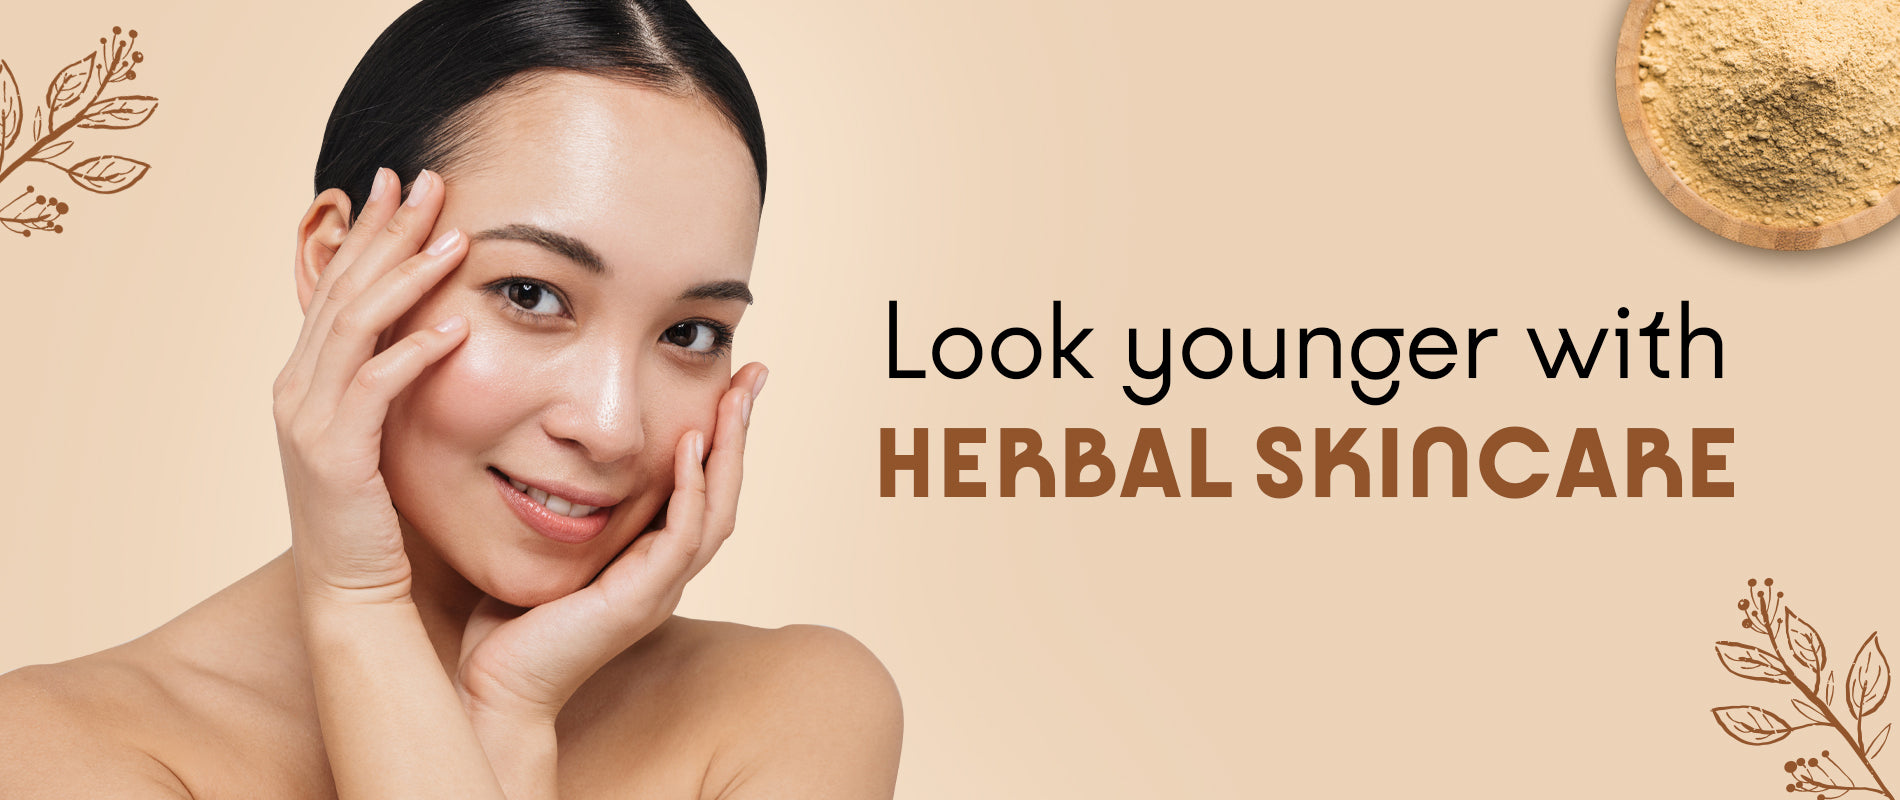 Look younger with herbal skincare